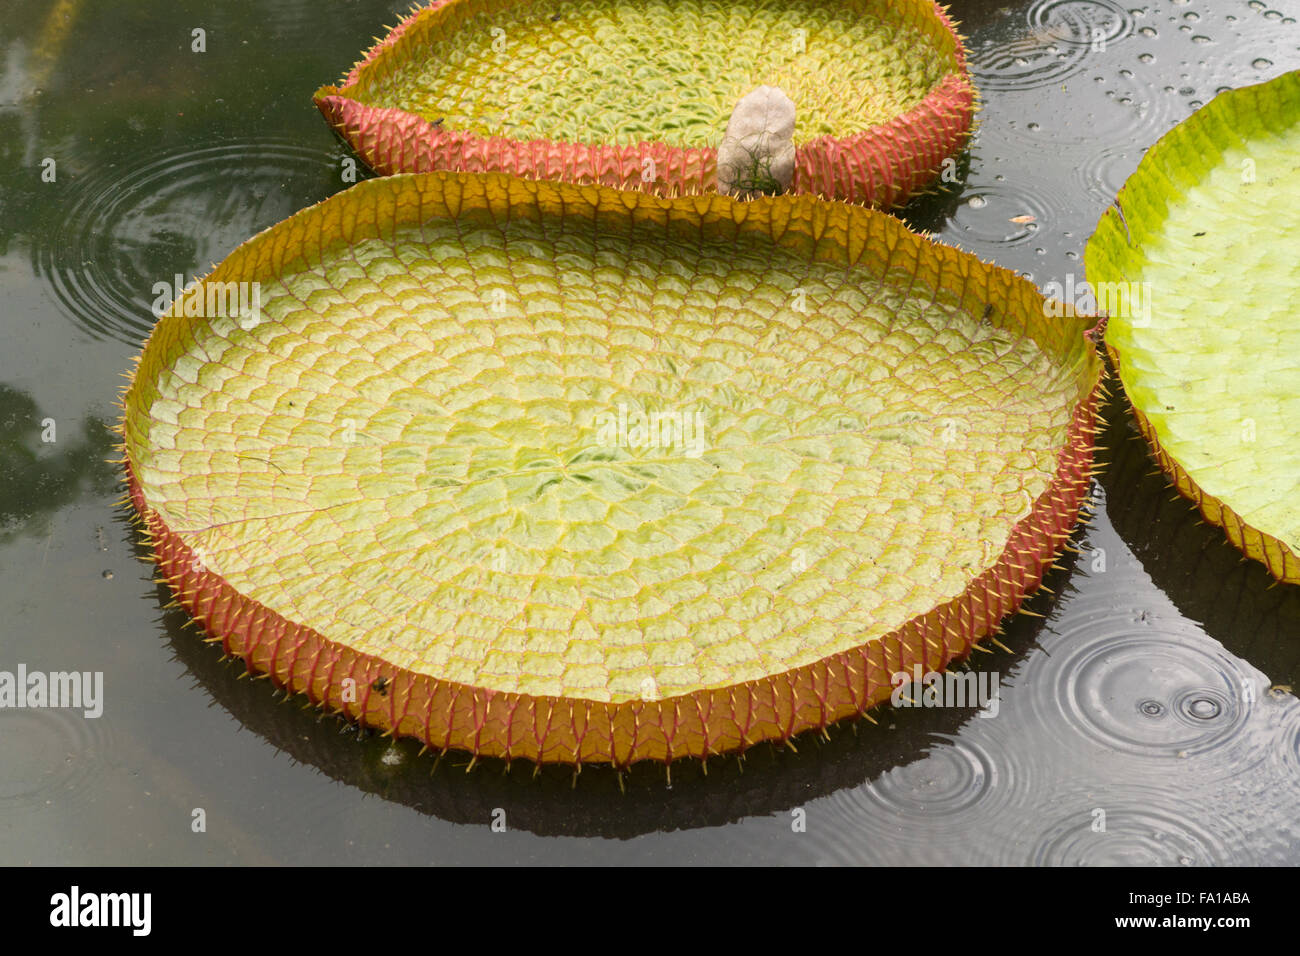 Raindrops falling amongst giant water lilies (victoria amazonica) at the Pamplemousses Botanical Garden, Mauritius Stock Photo